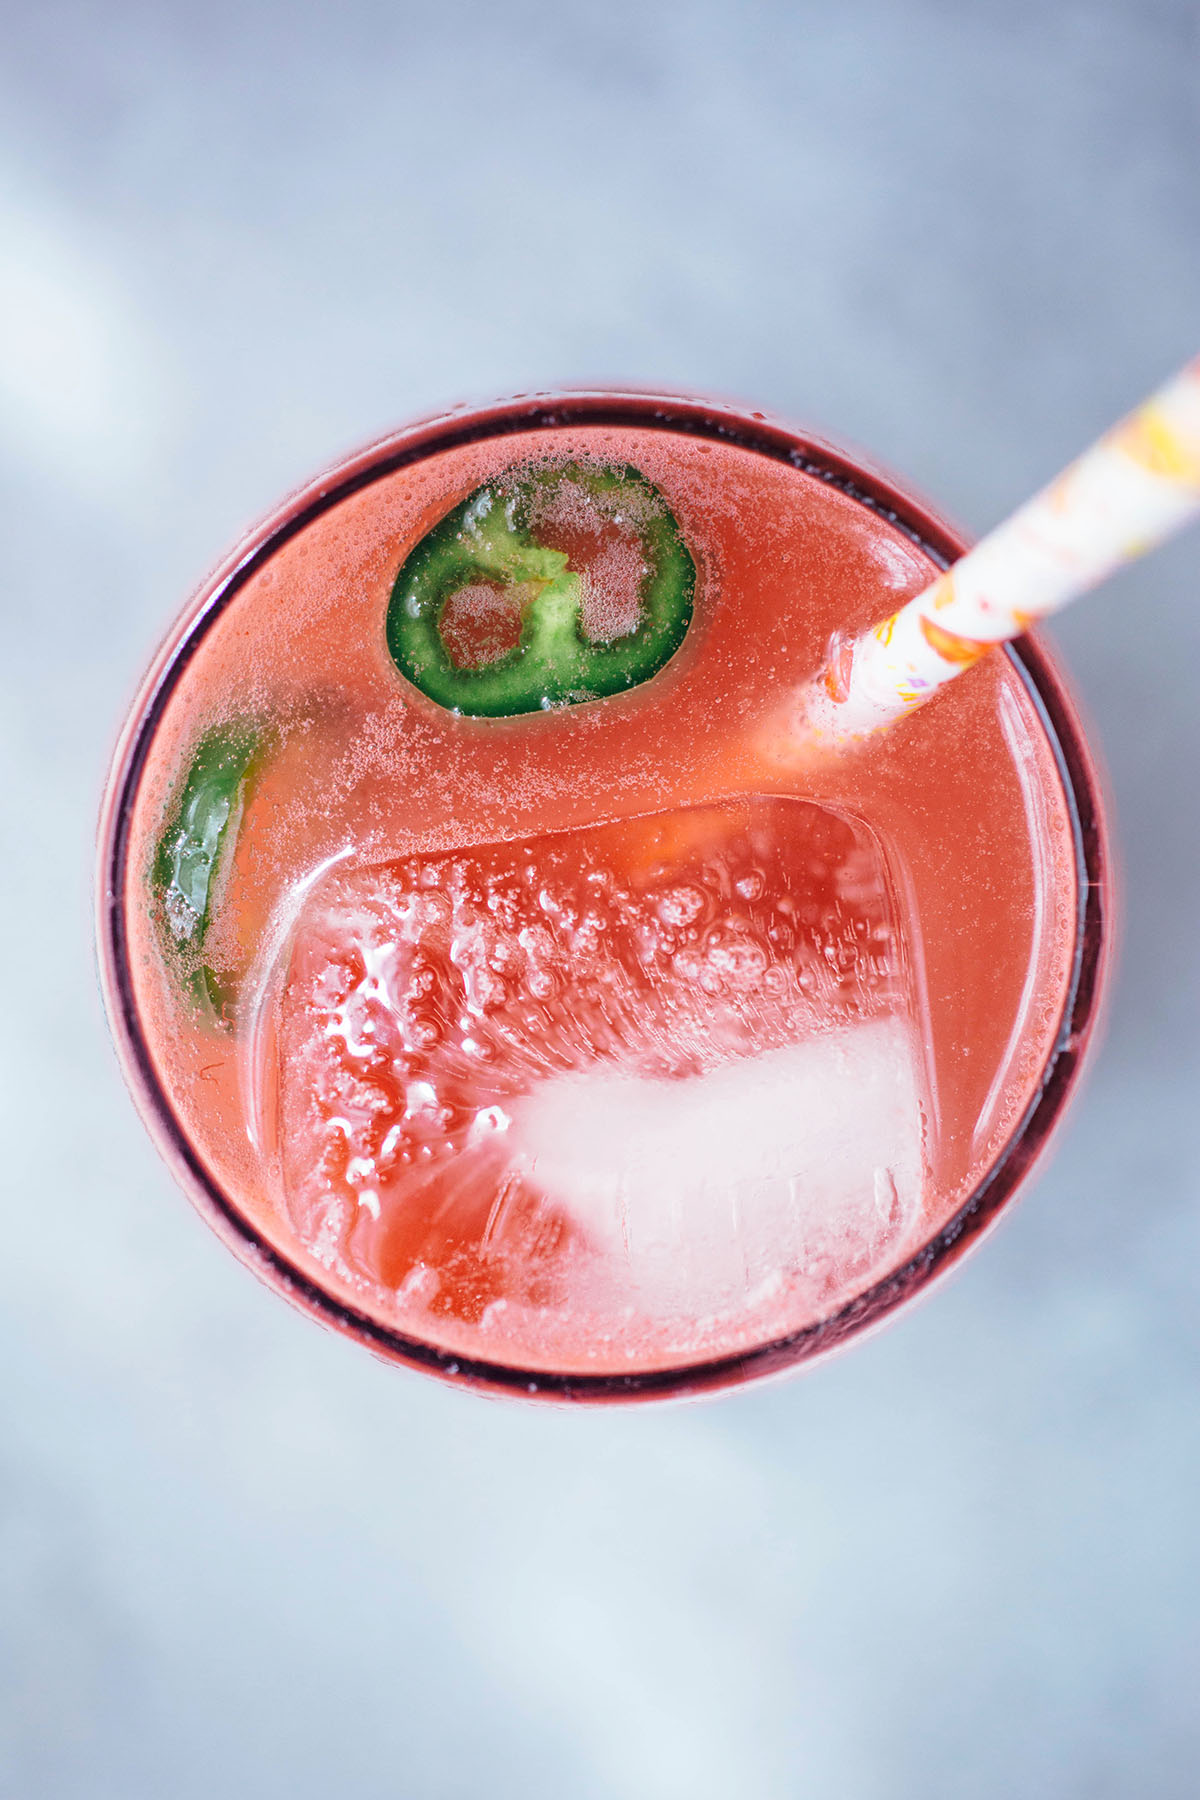 Spicy Watermelon Soda garnished with jalapeno slices and straw